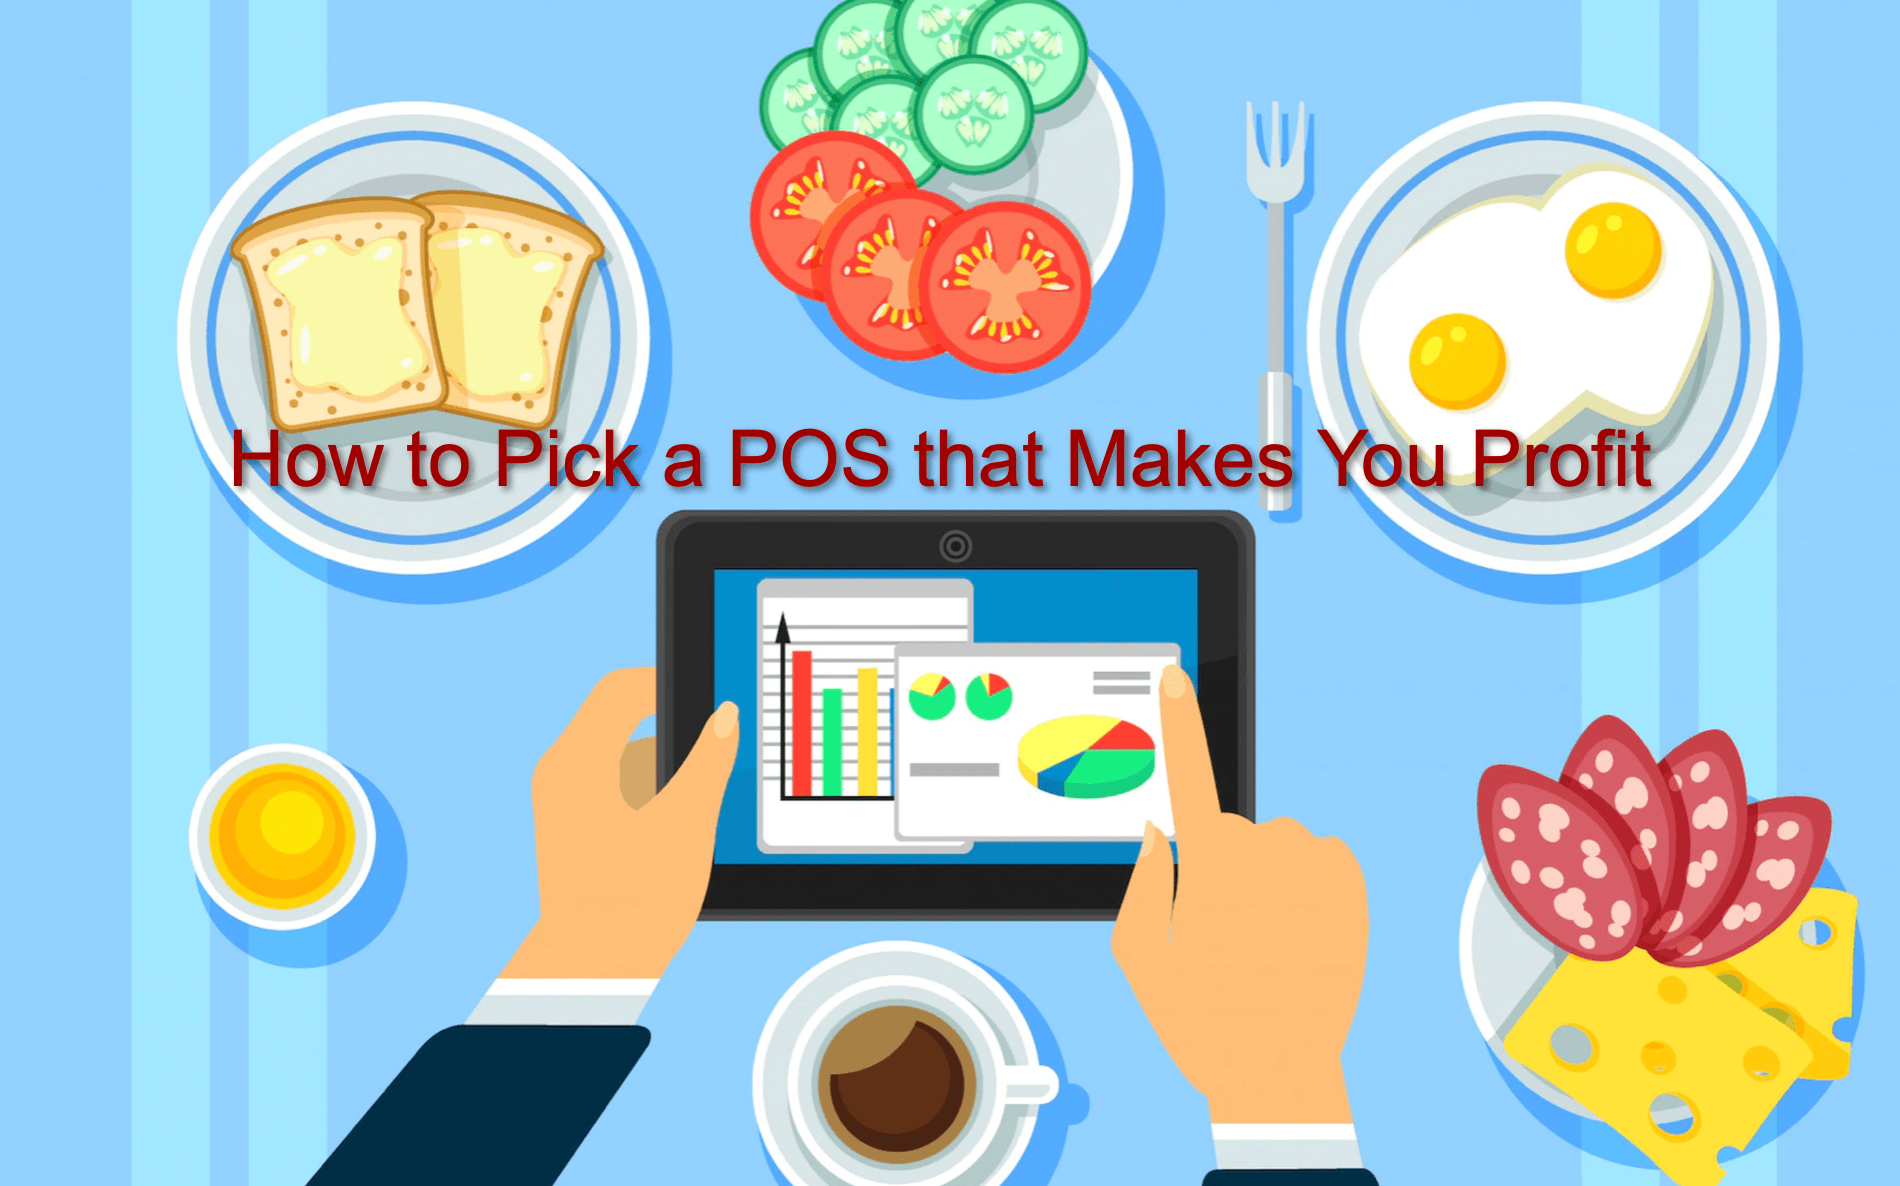 Cloud POS Hybrid POS or Legacy POS, which is best for restaurants